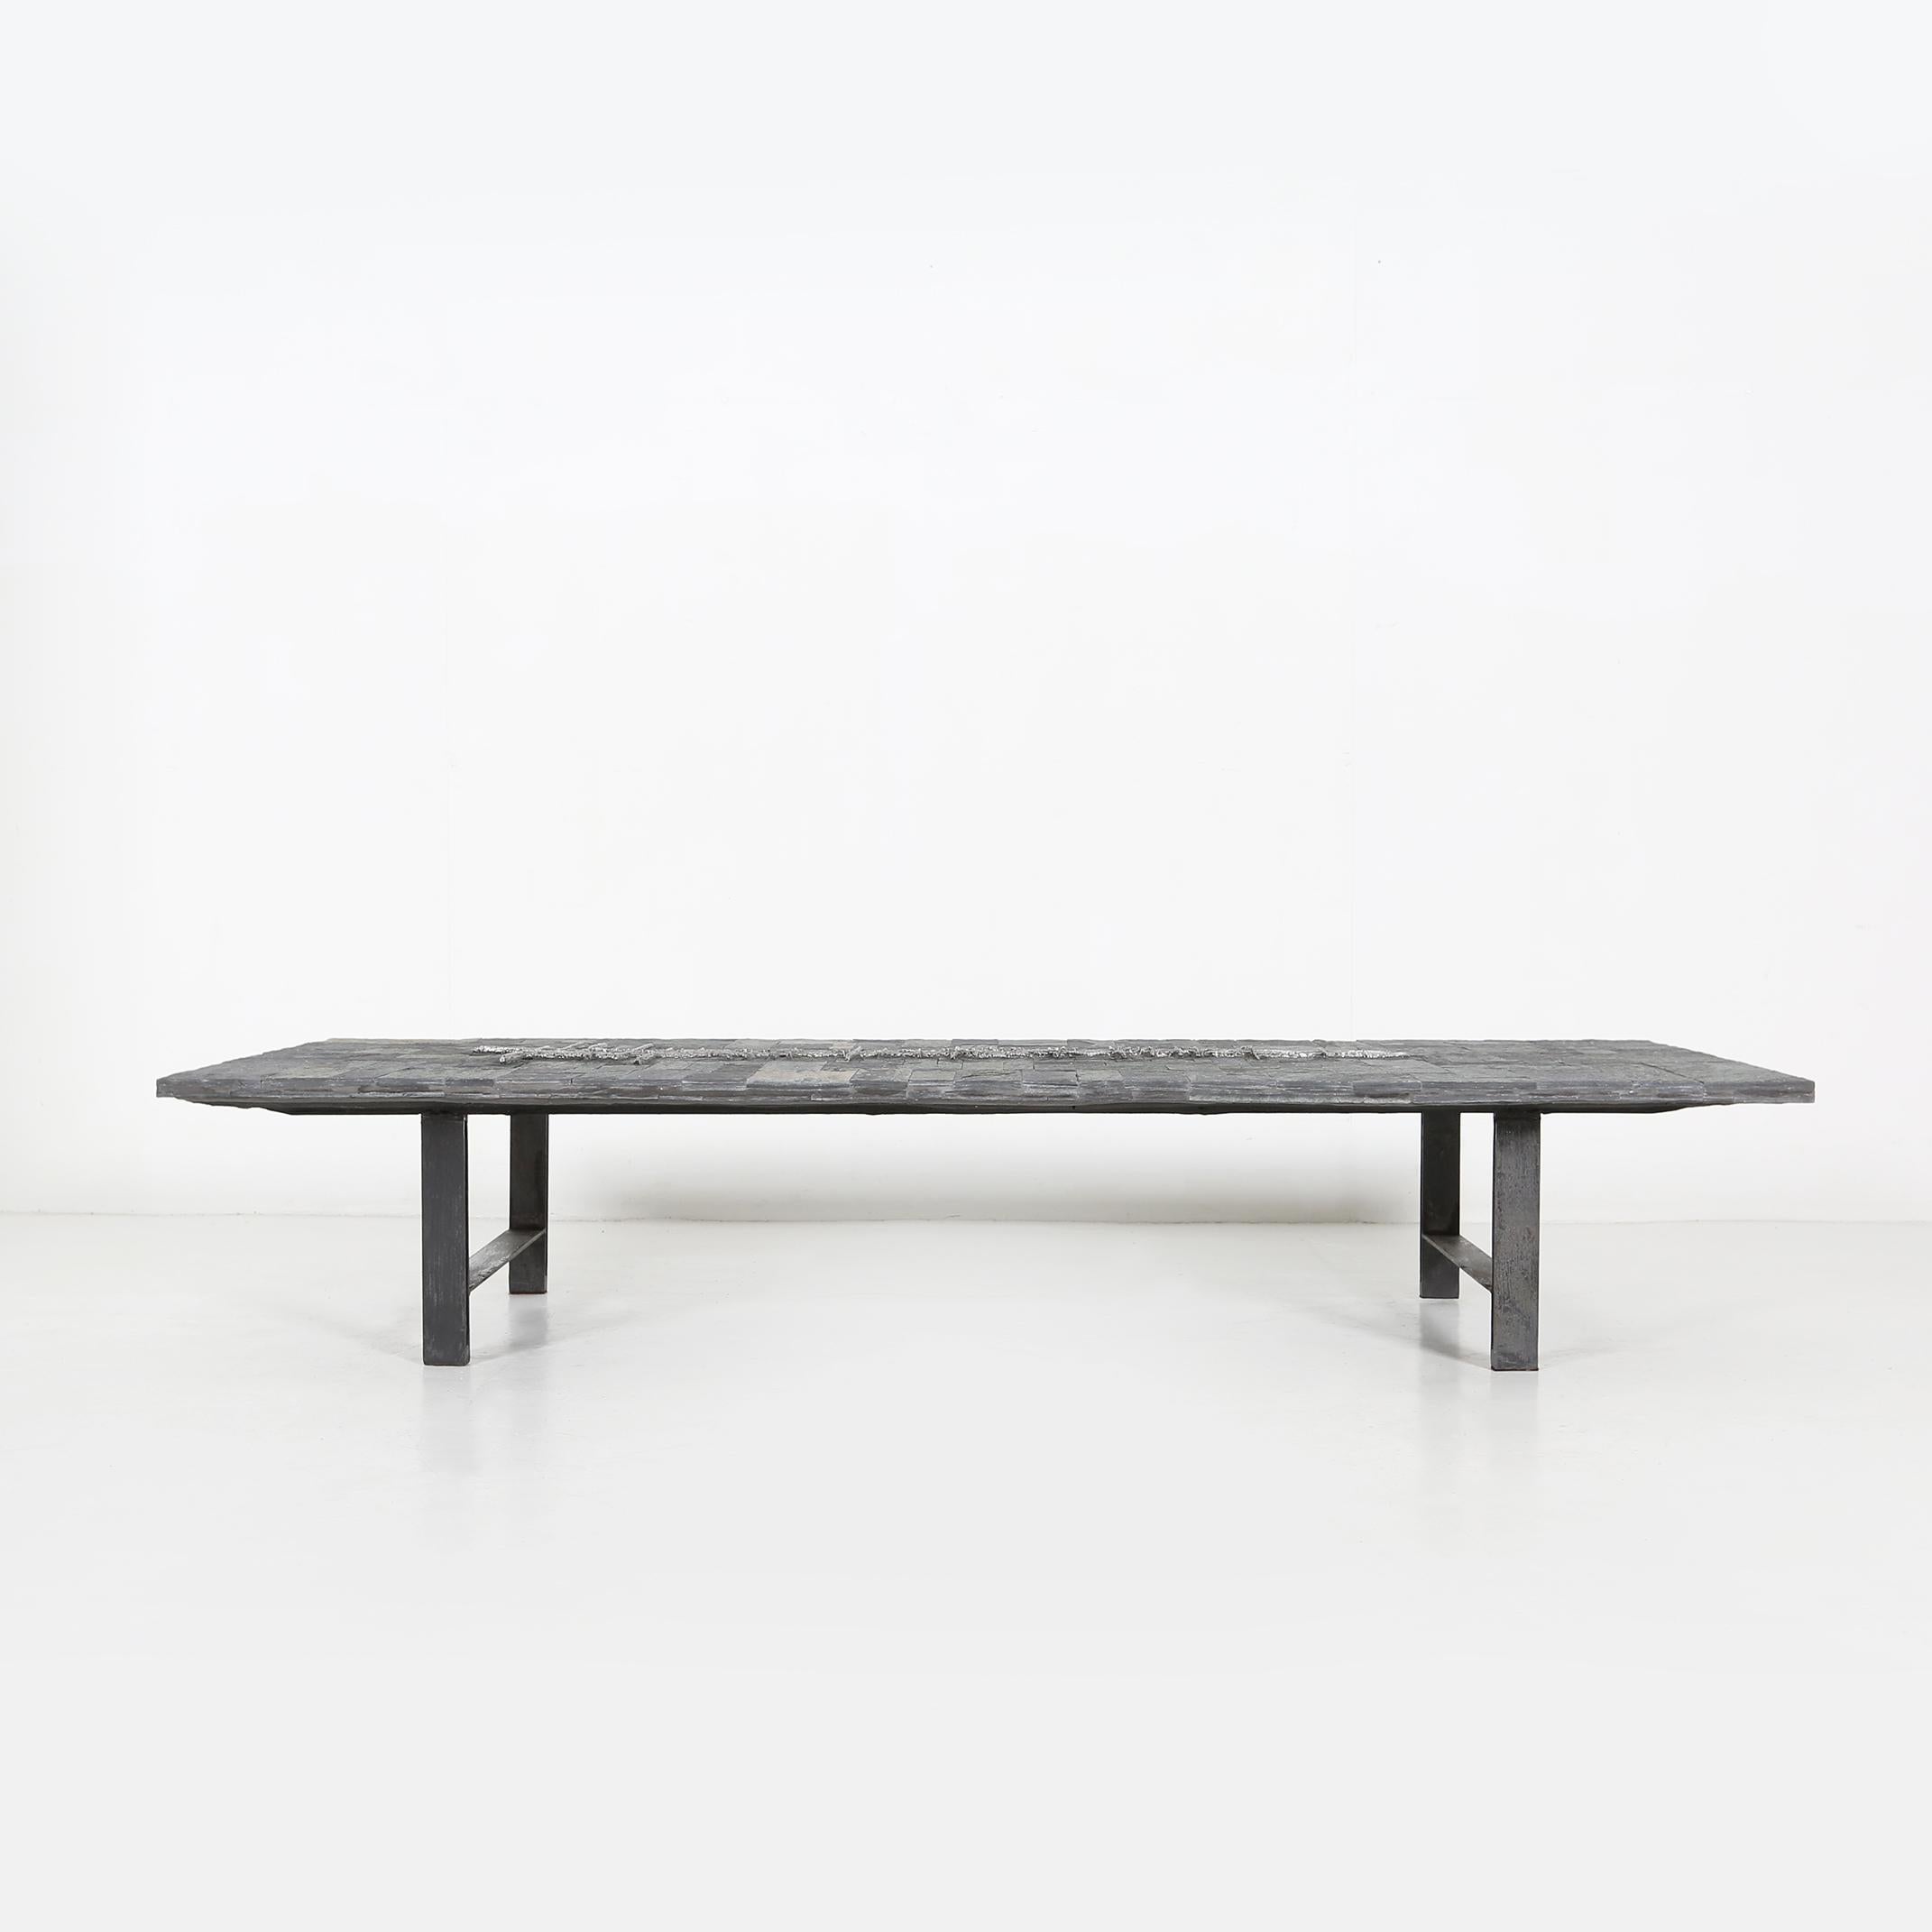 Very rare coffee table made by Belgian artist Pia Manu.
Made of brazilian slate stone and a rebar steel base.
The table has a very brutalist look and the slate stone has a sparkle.